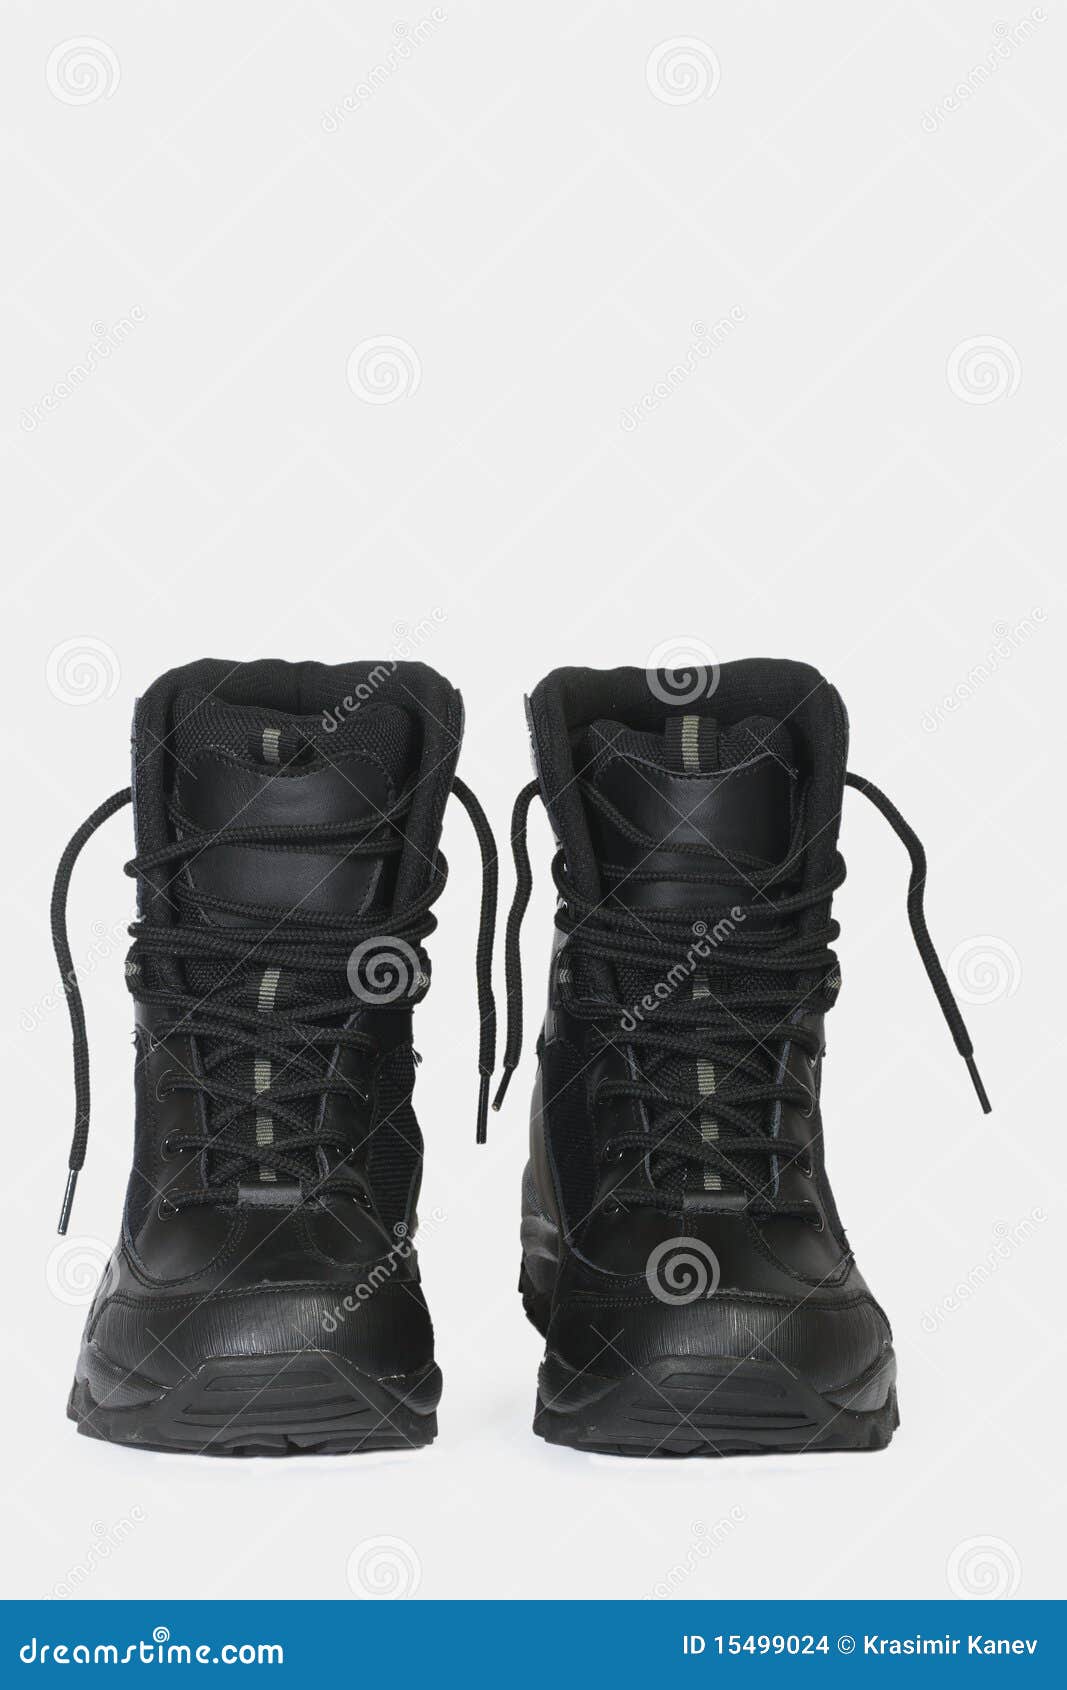 Black hiking boots stock photo. Image of human, fastened - 15499024